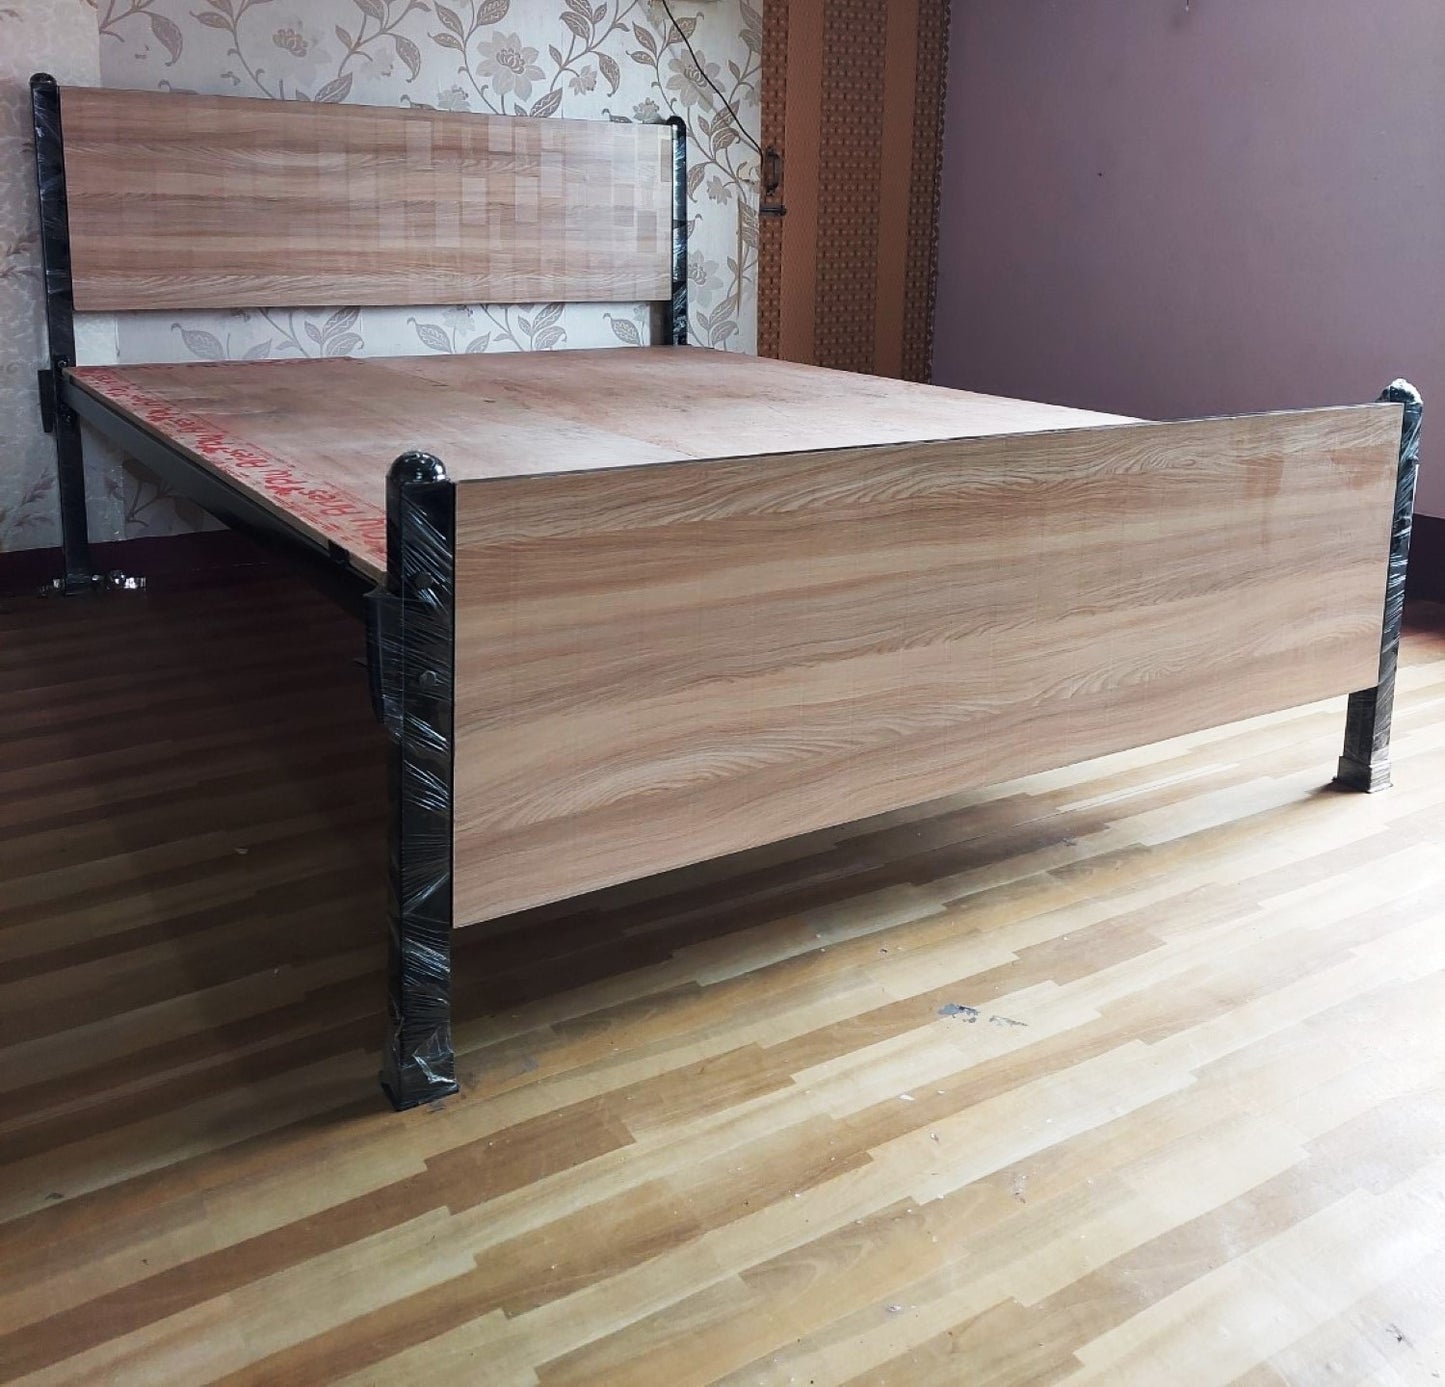 Bowzar King Size 6X6.5 Feet Metal Bed With Wooden Look